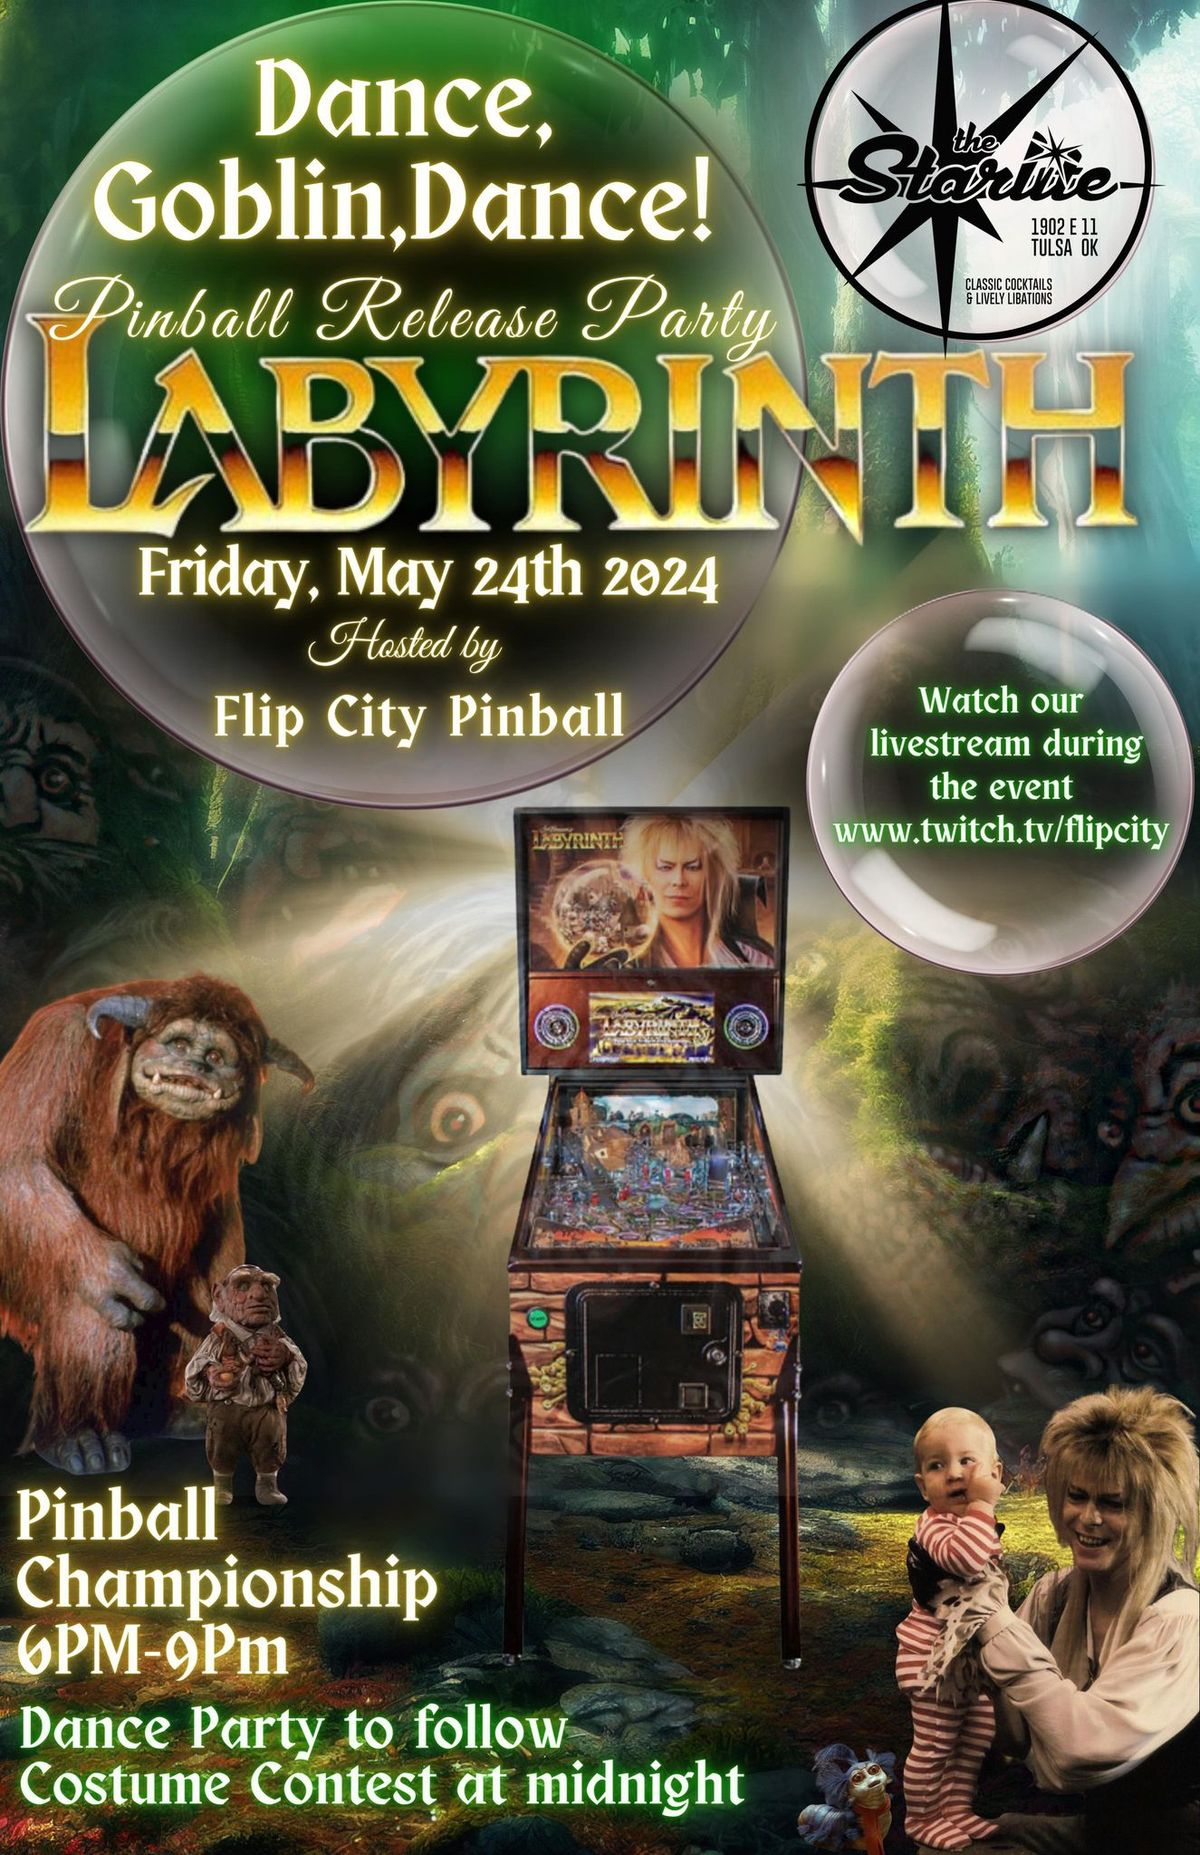 LABYRINTH - Pinball Release Party